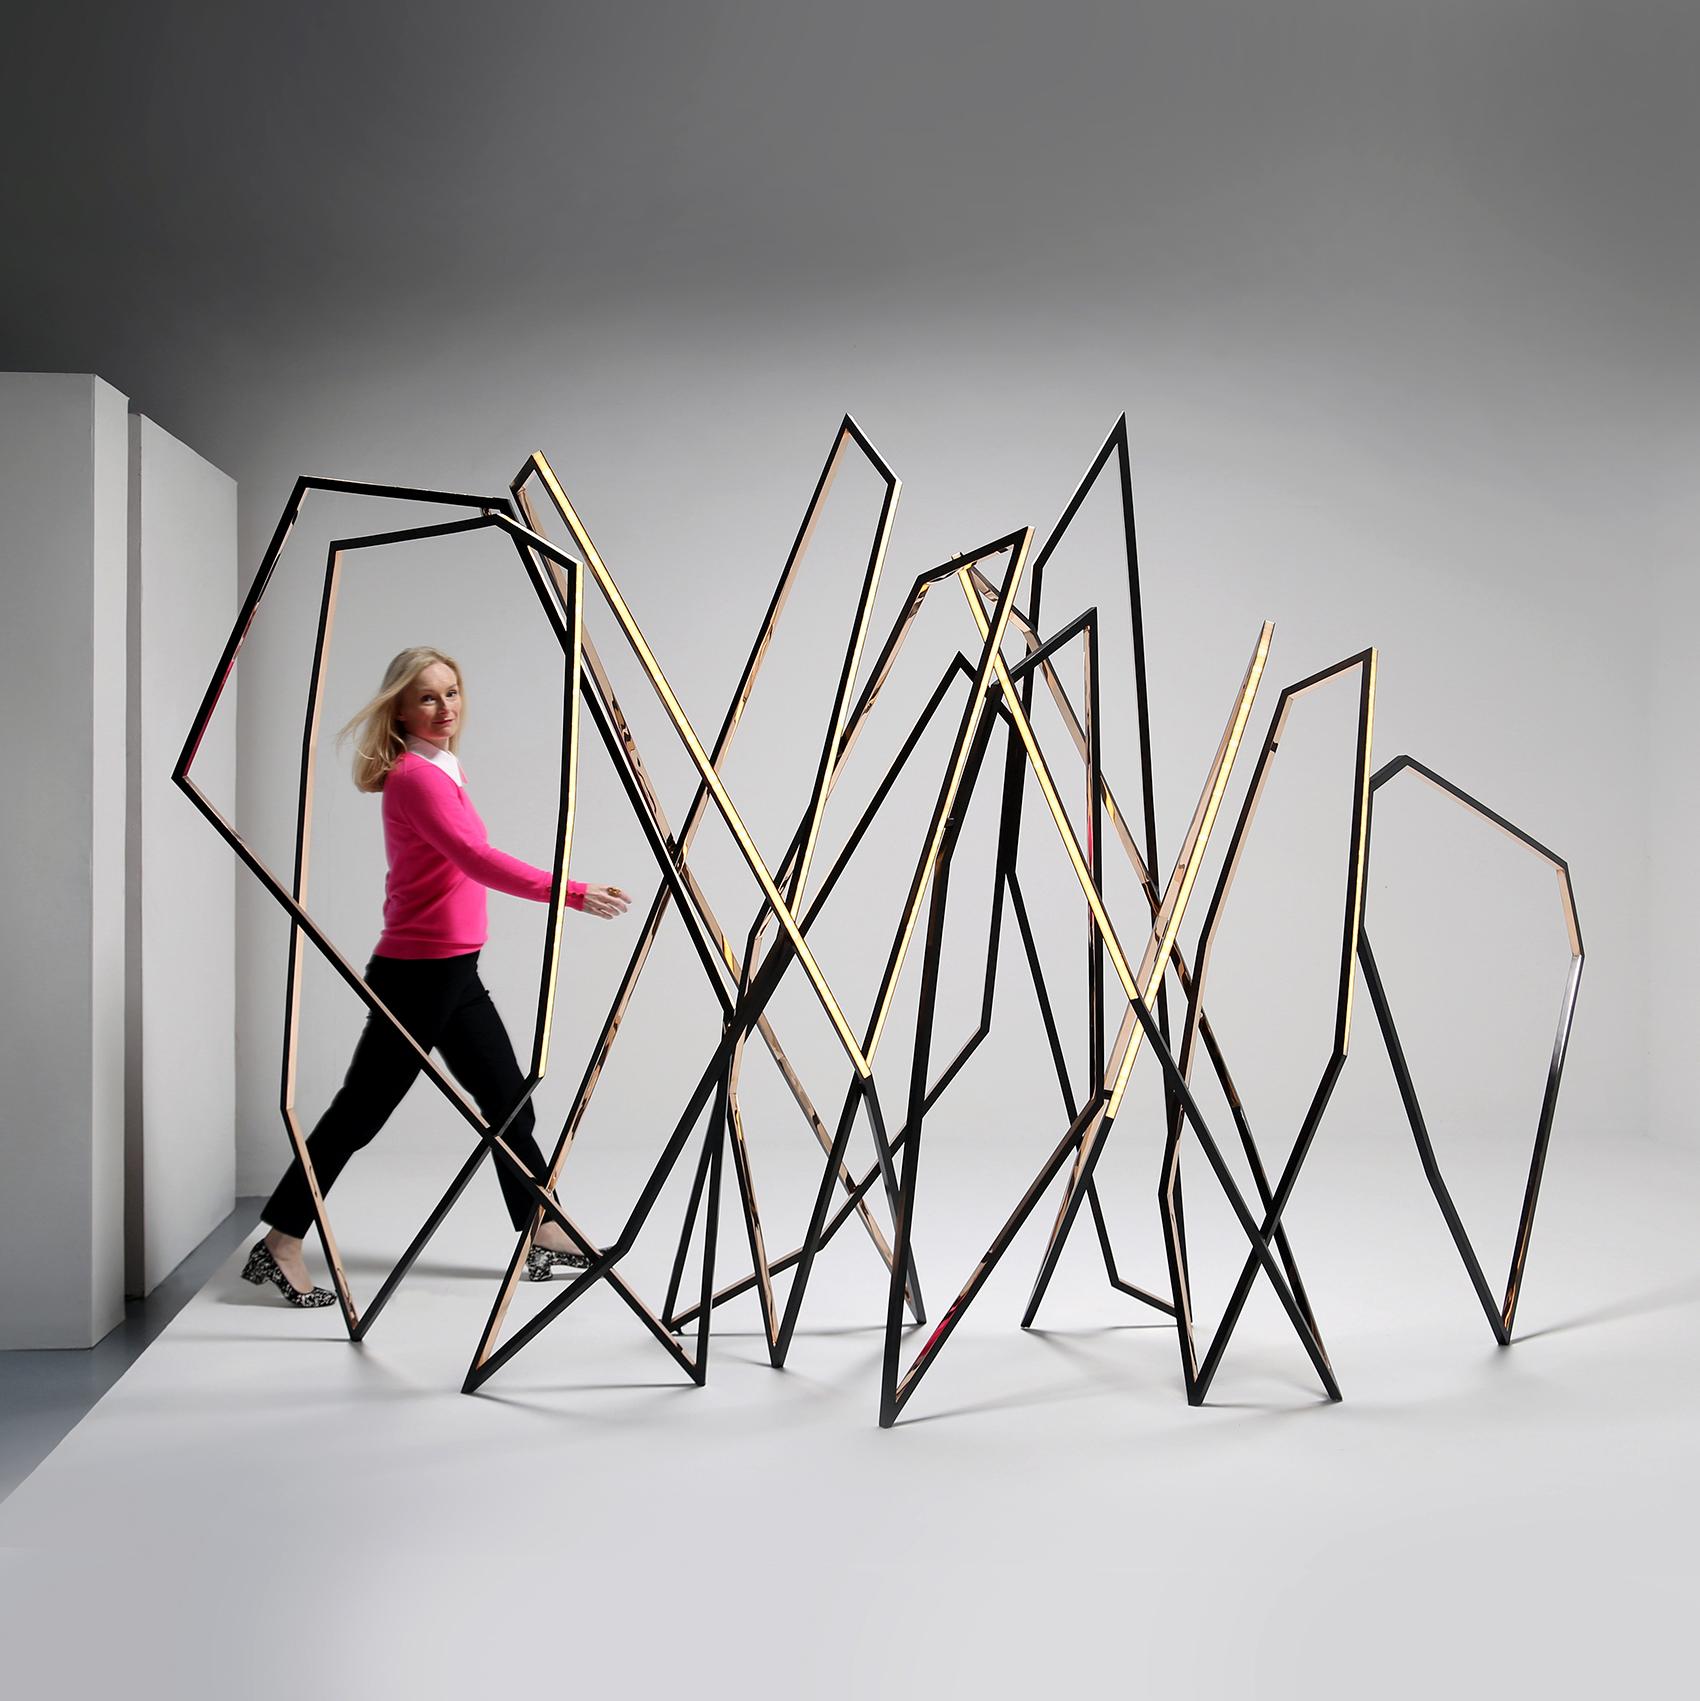 In many of her most powerful sculptures Niamh Barry abandons her signature fluid ellipses for compositions of sharp angles arranged in dynamic, crisscrossing lines-forms that suggest a whole different category of motion. With walking, one of Barry's